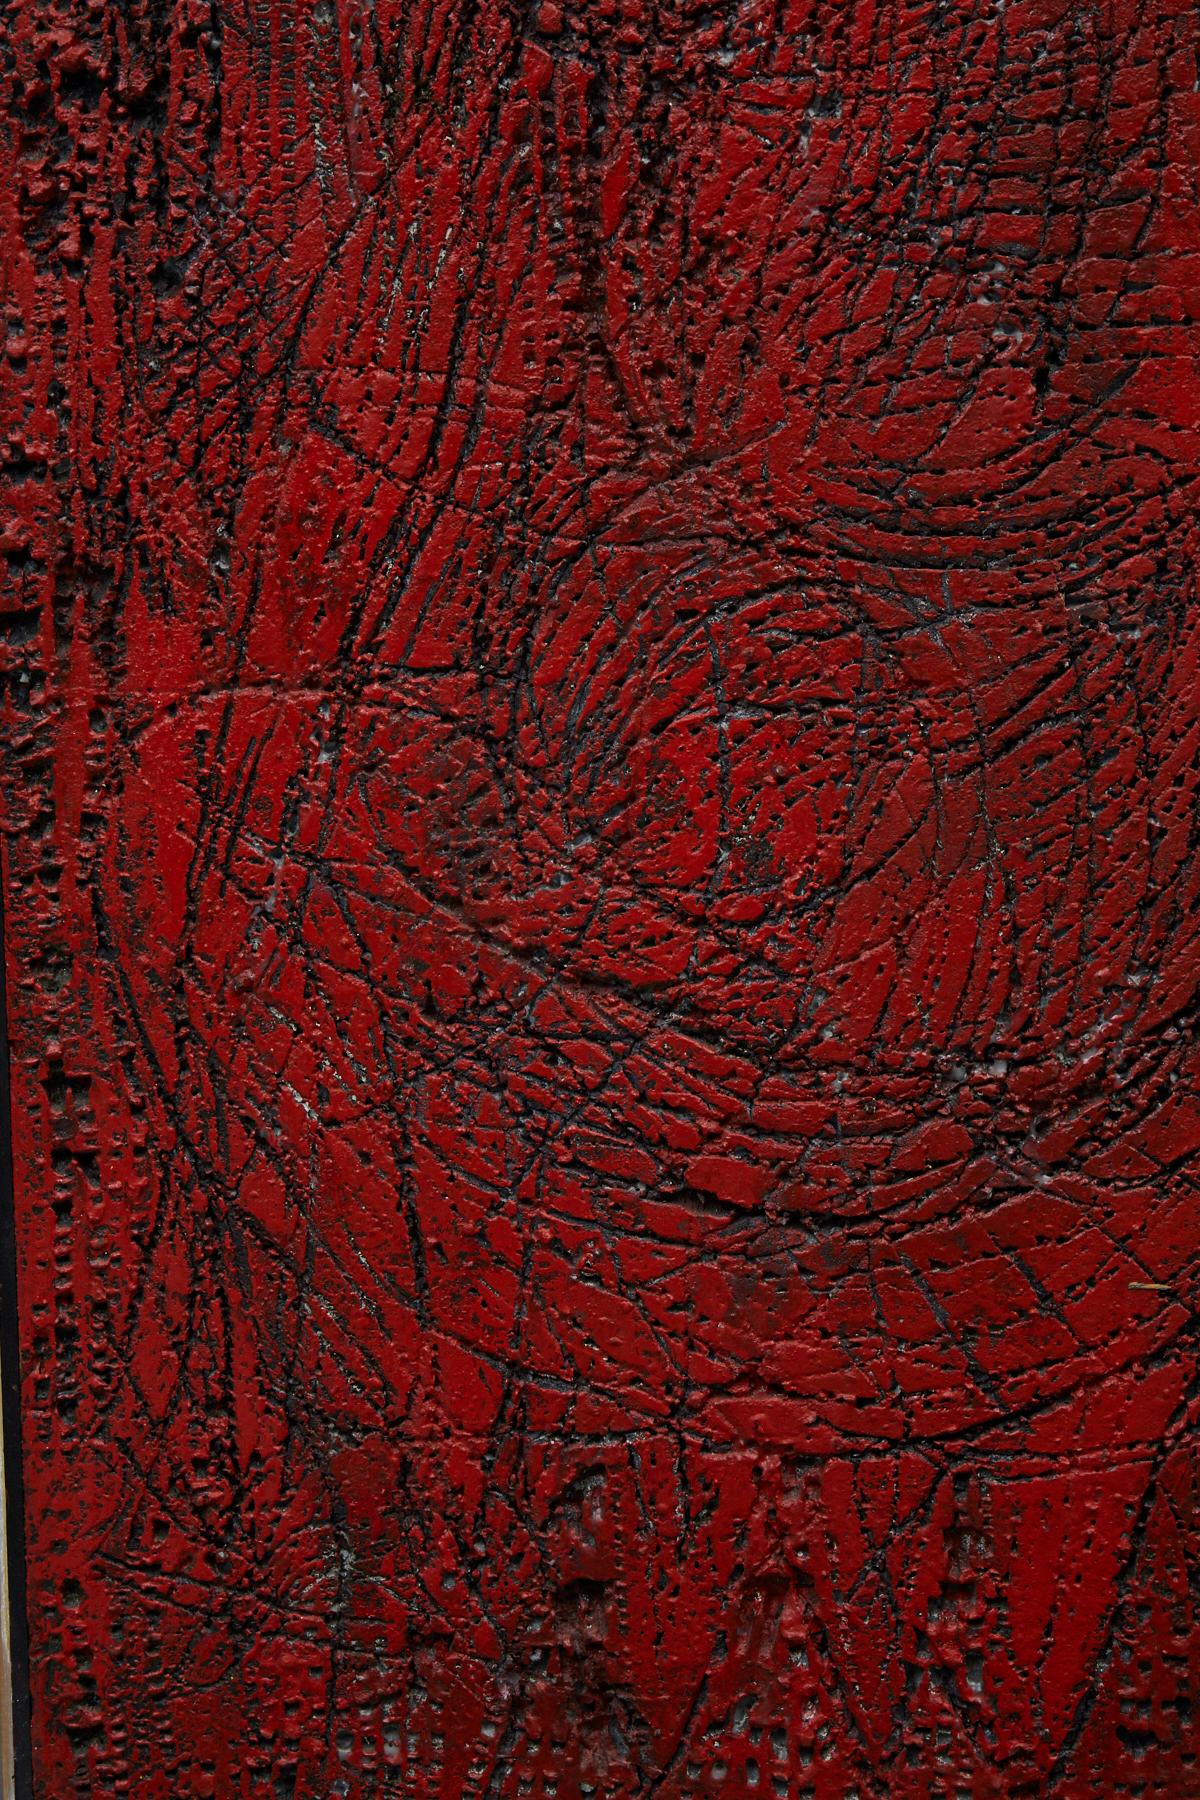 Red Seated Figure 1